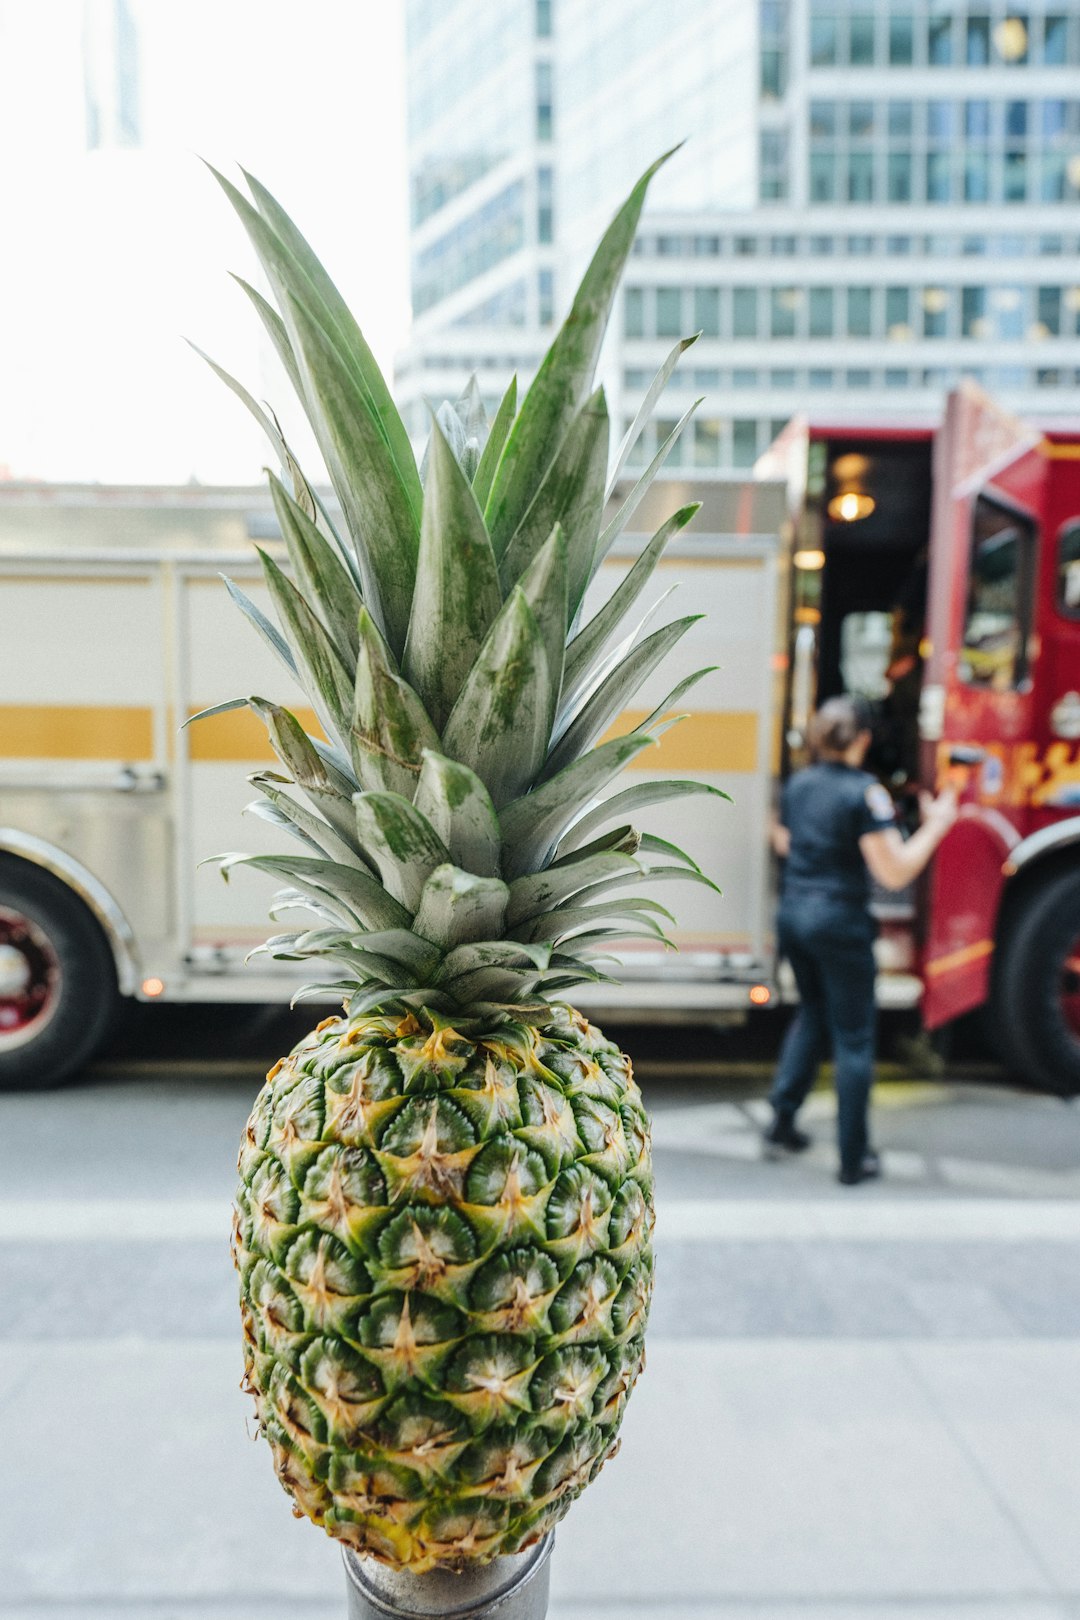 pineapple image from toronto for free download